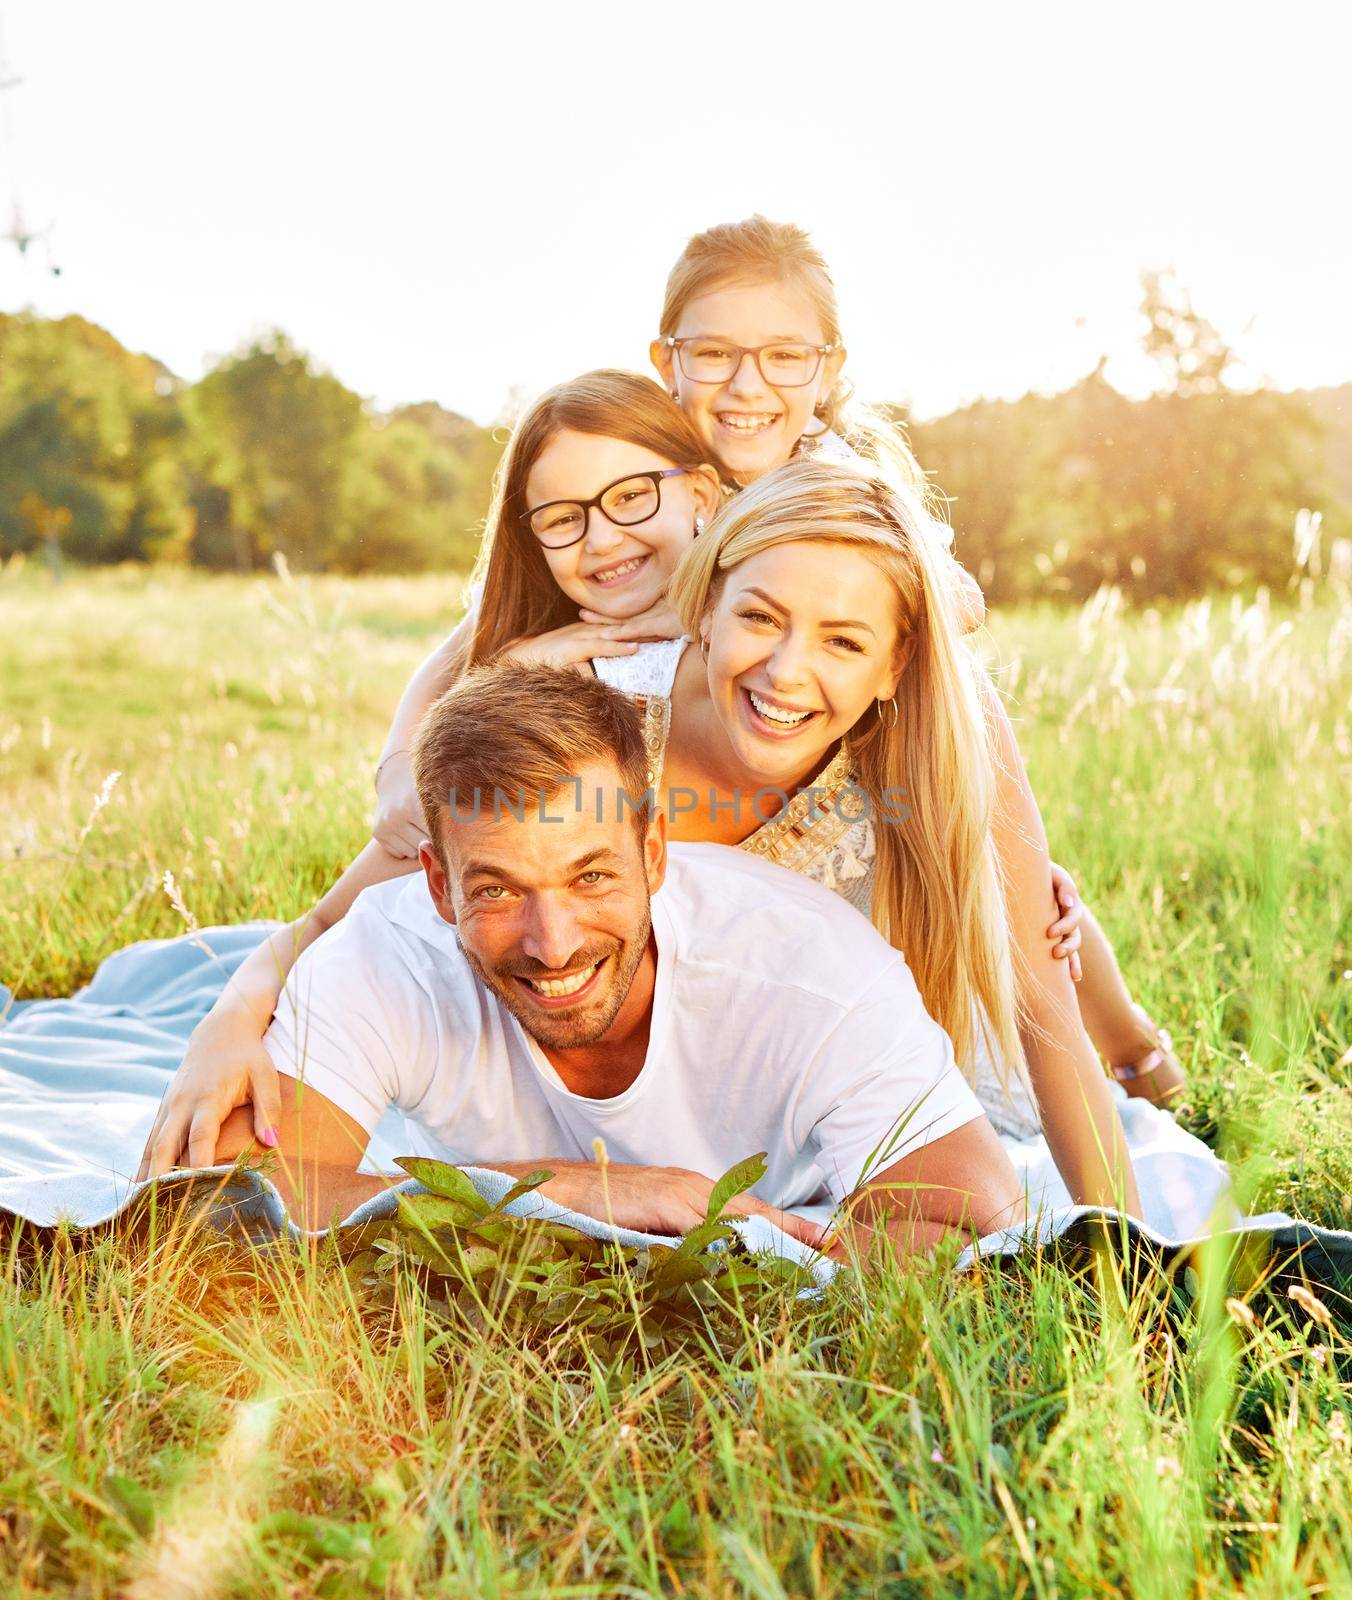 child family portrait outdoor mother woman father girl happy happiness lifestyle having fun bonding by Picsfive